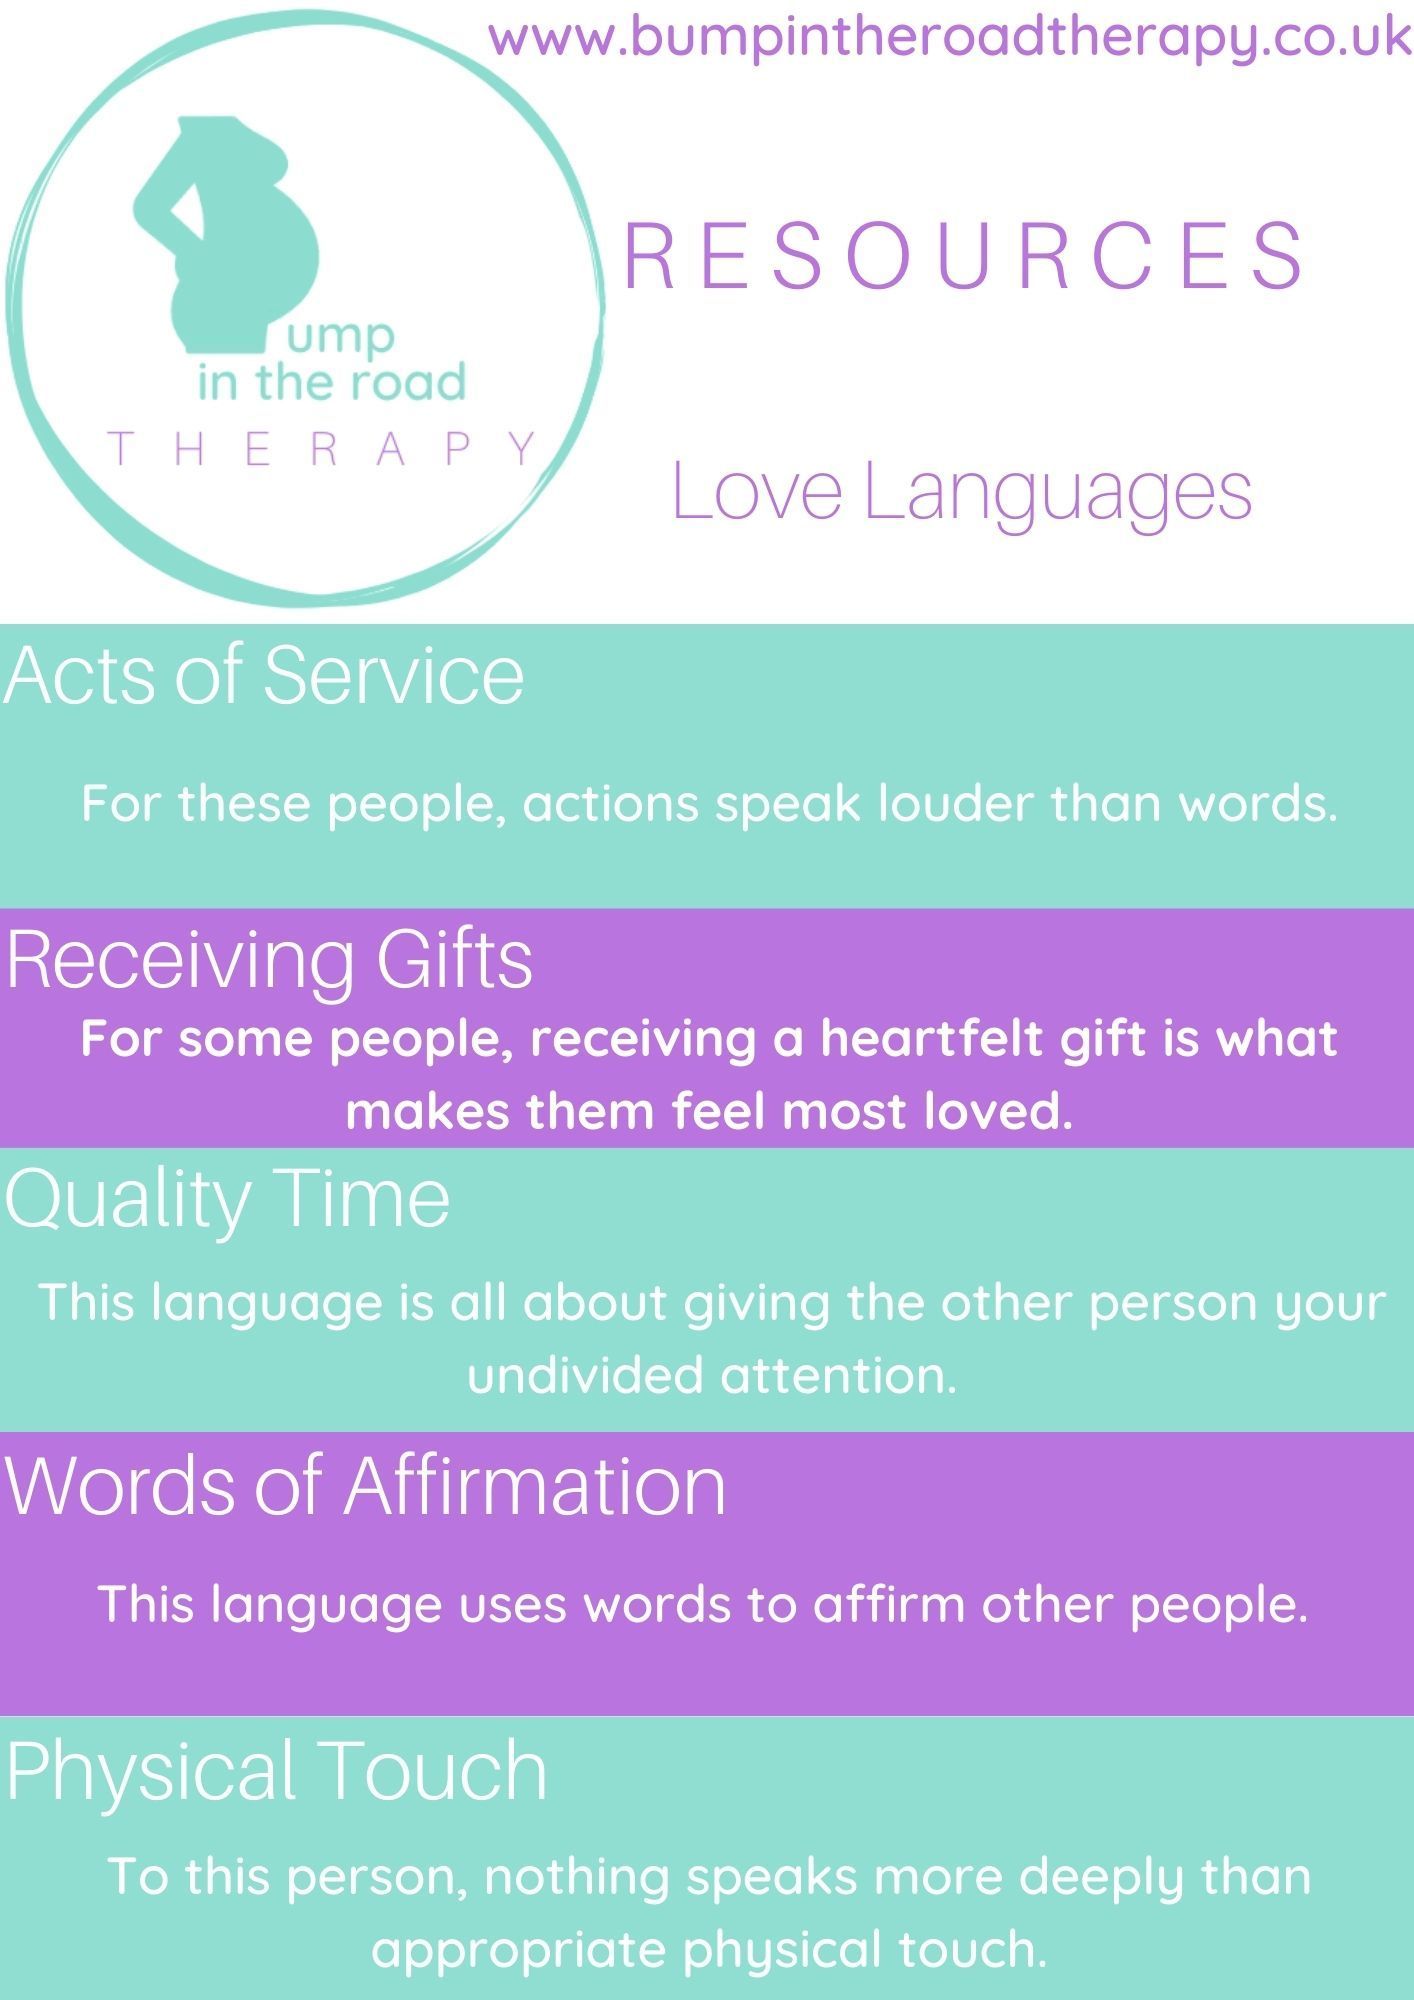 Gallery Photo of Resources - Love Languages